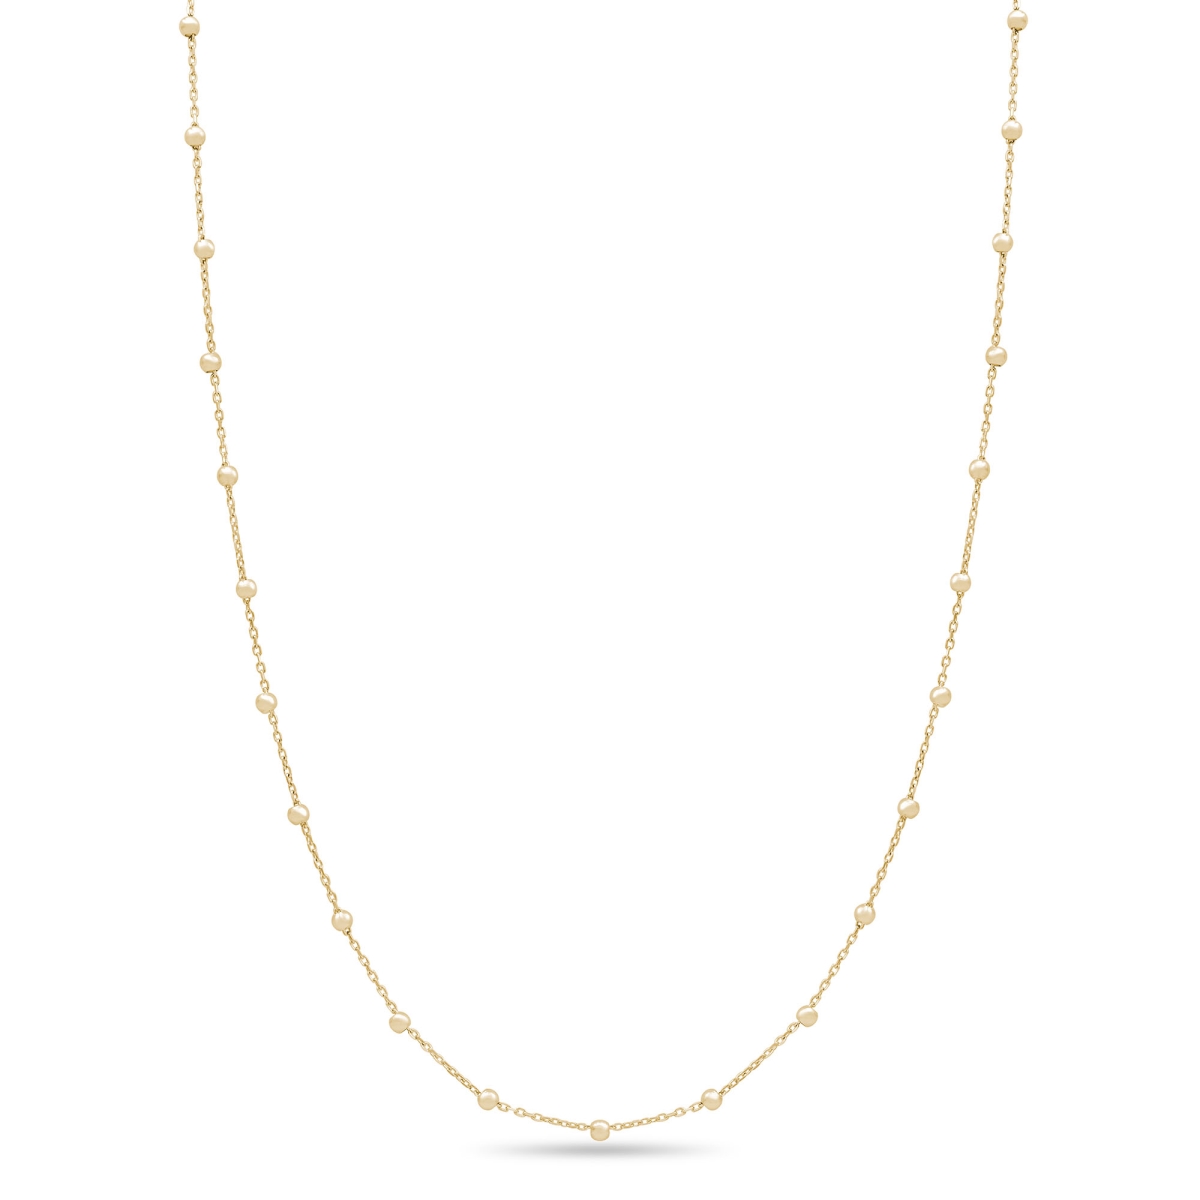 Picture of Majesty Diamonds MDR220250 Beads by The Yard Beaded Chain Necklace in 14K Yellow Gold